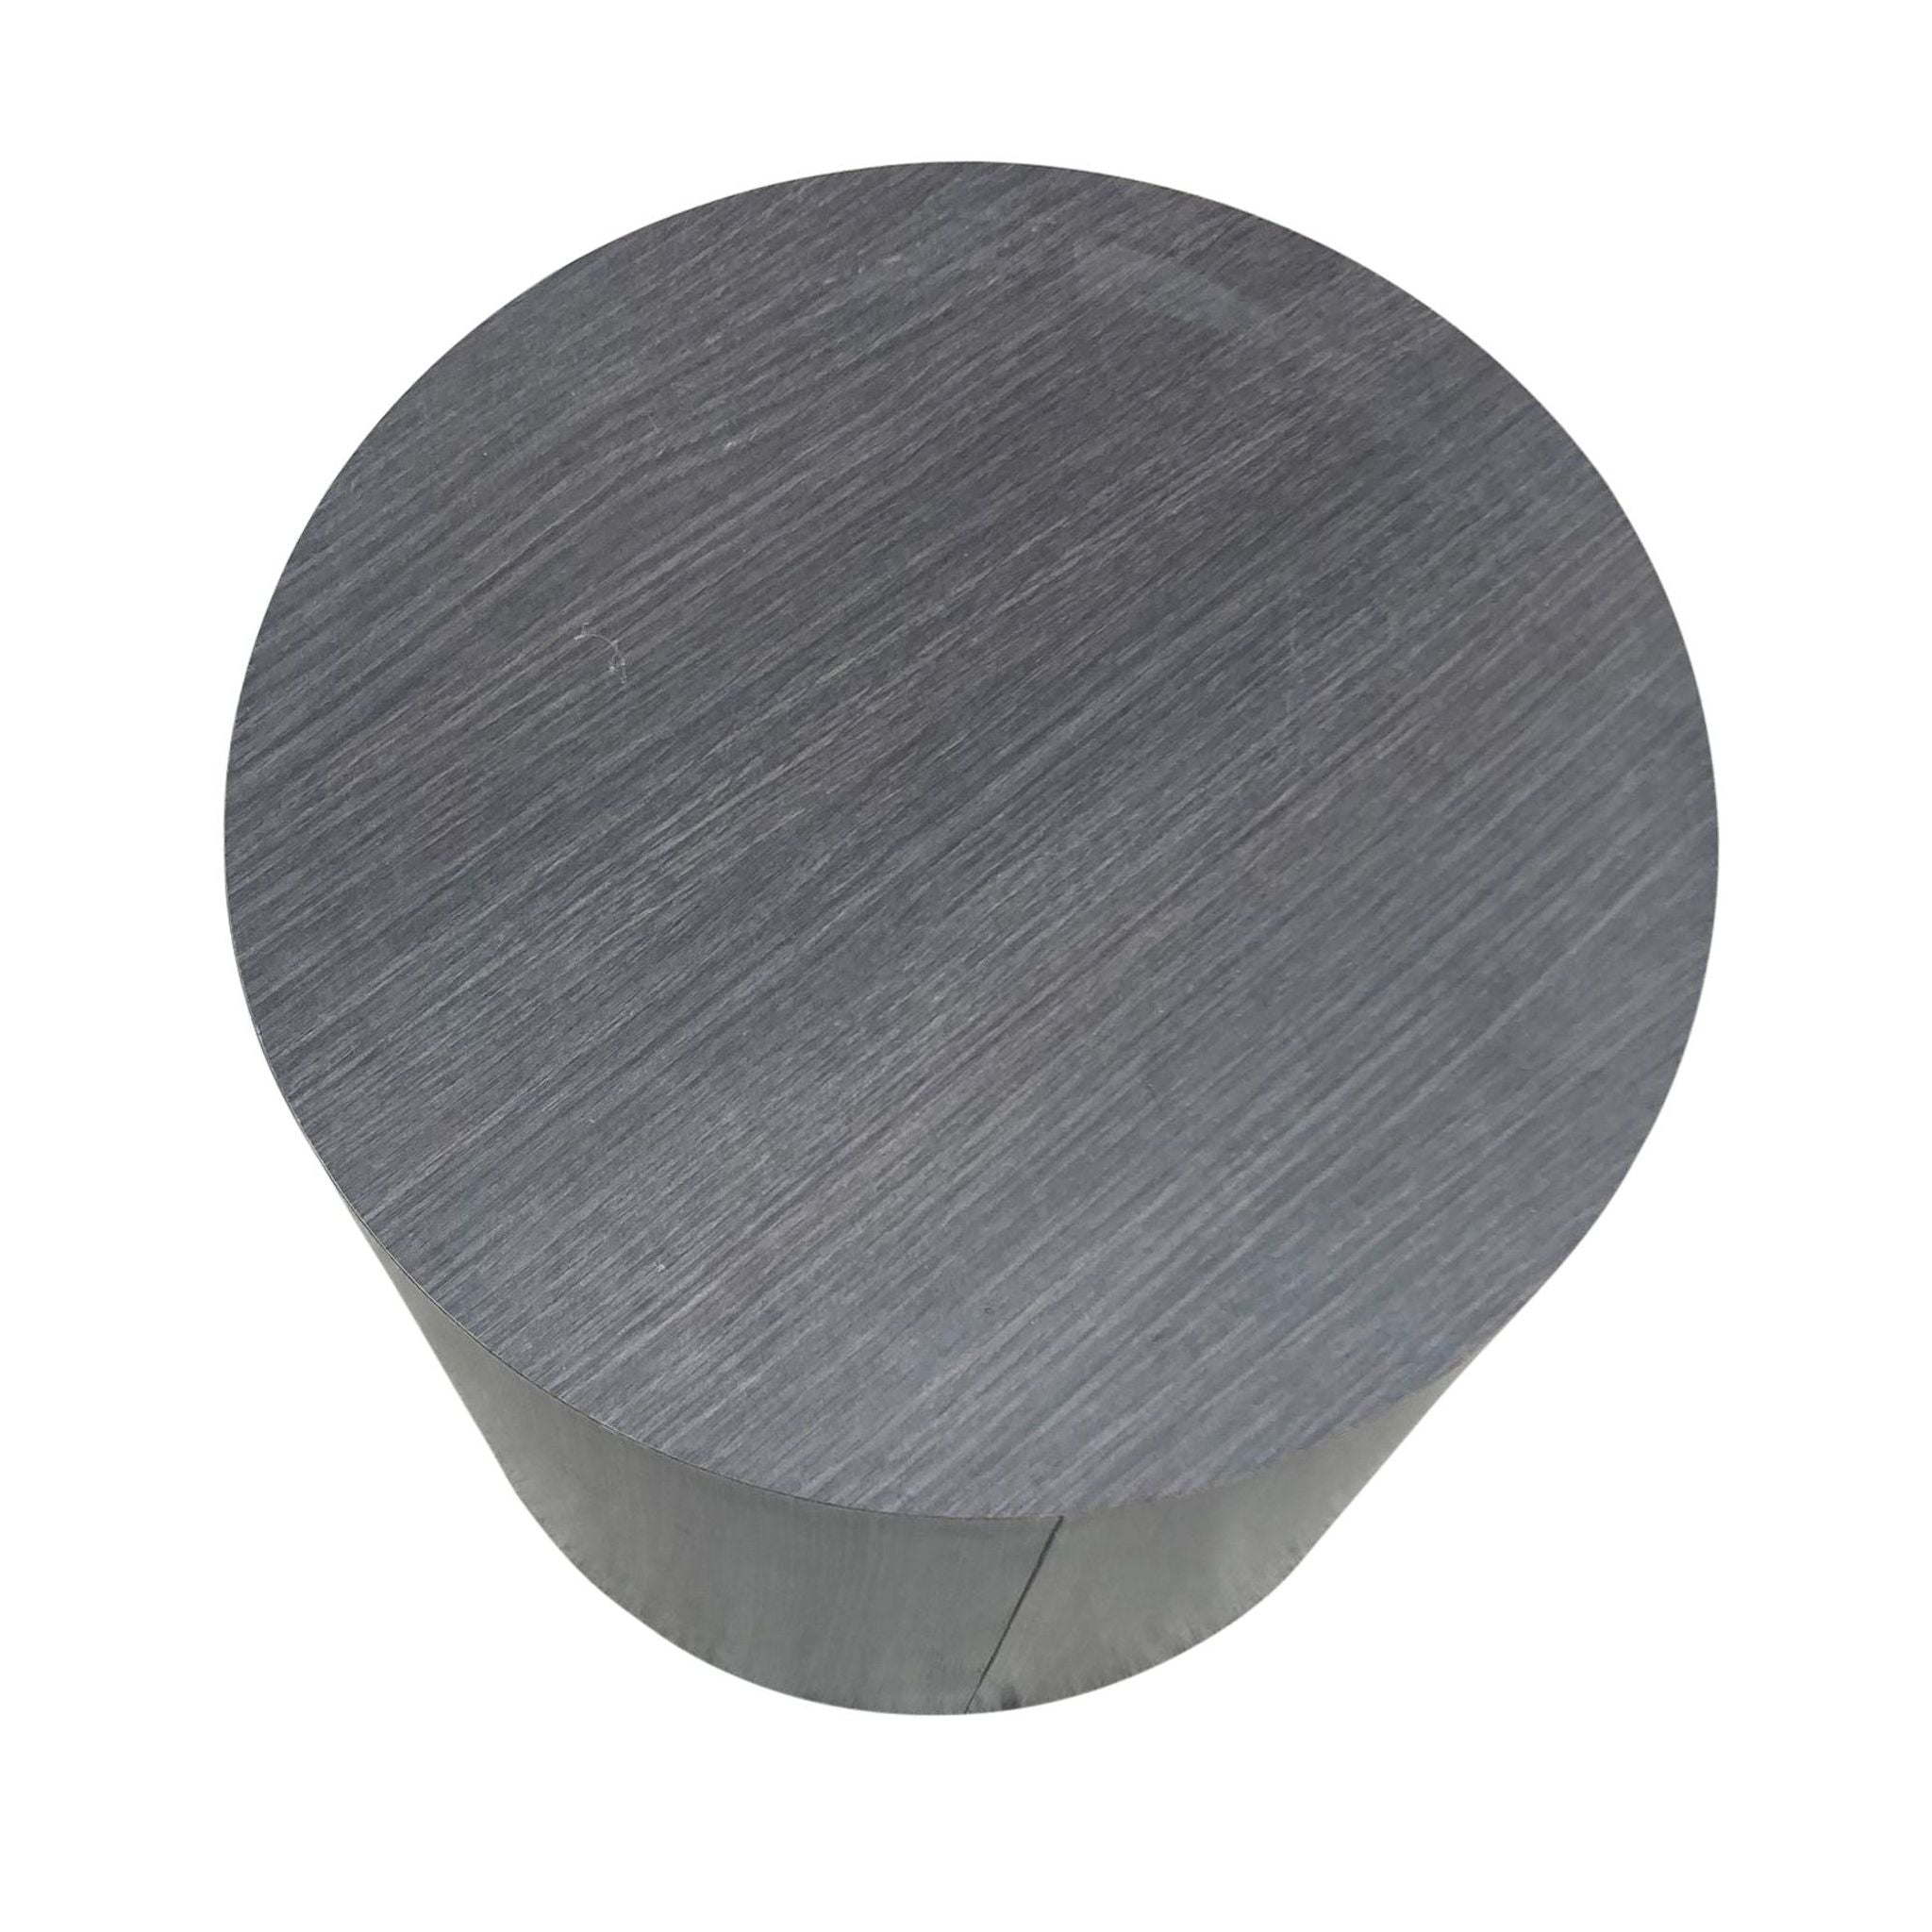 2. Top view of a round Reperch side table showcasing the textured, wood-grain detail in a dark gray finish.